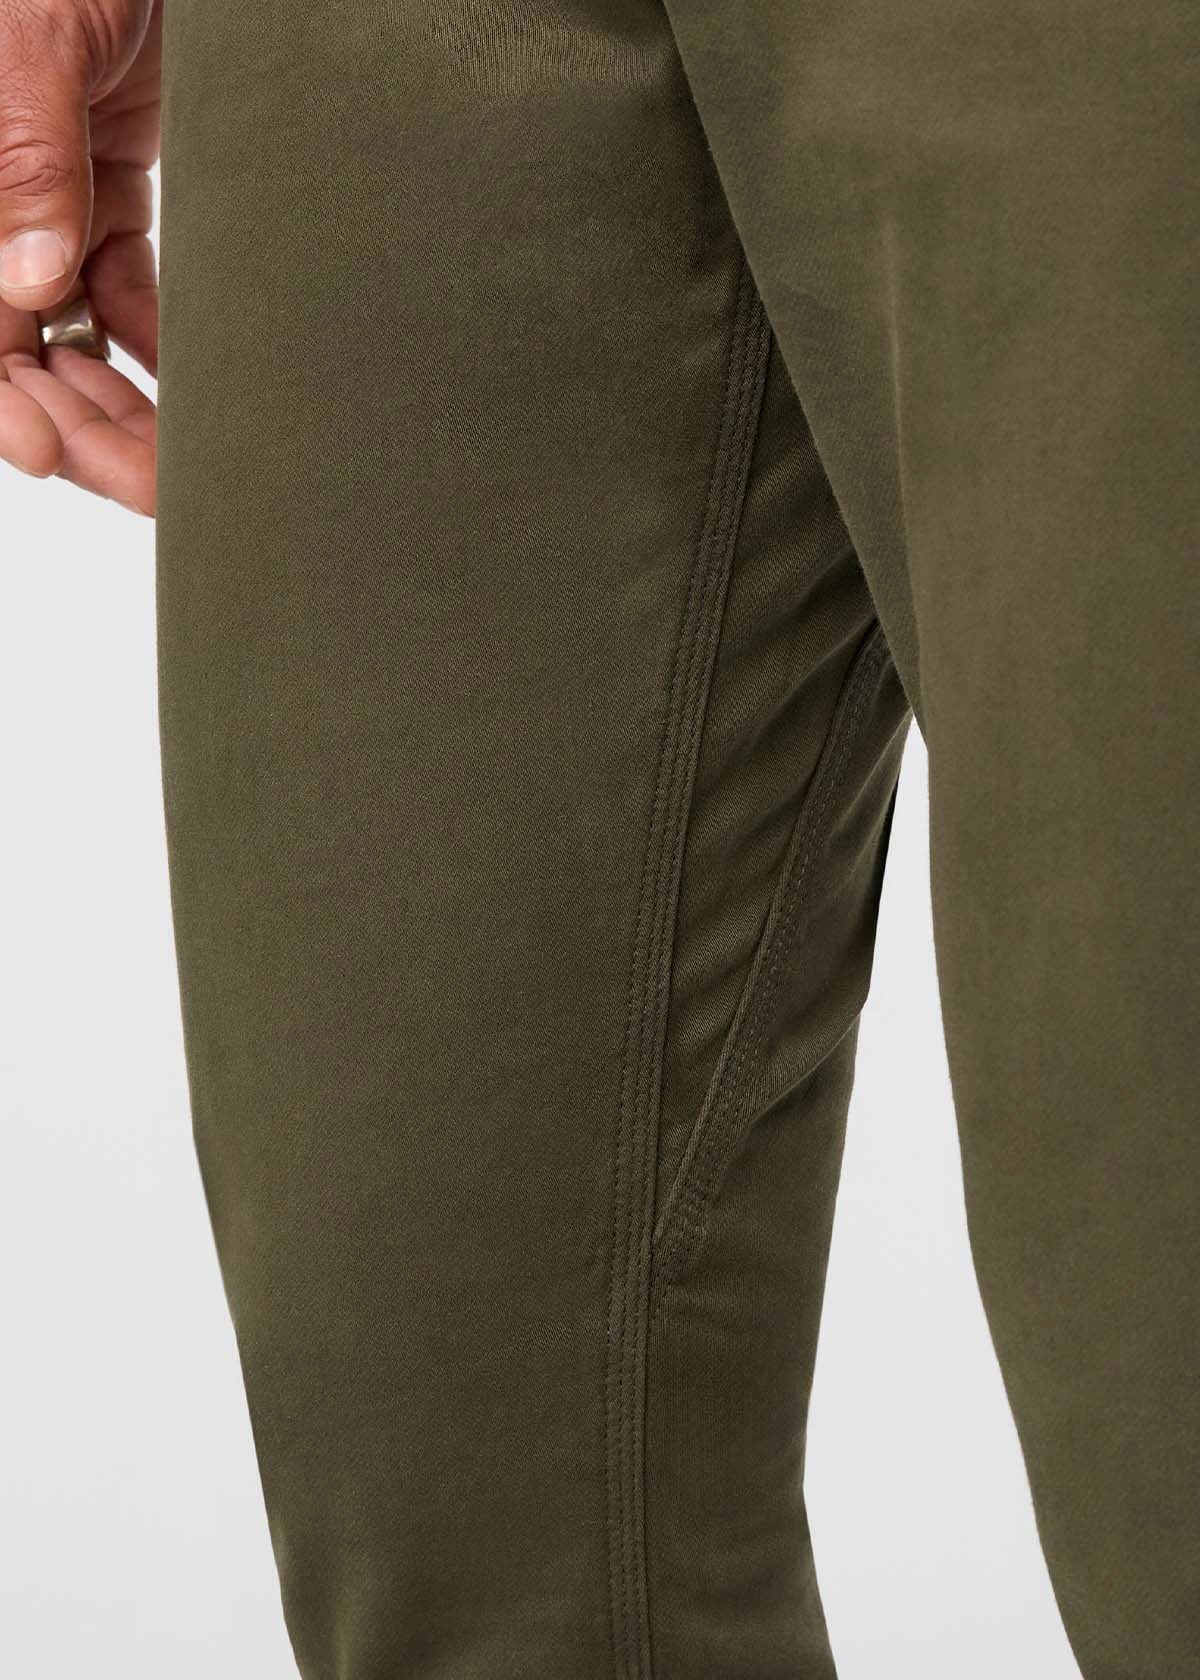 man wearing a army green Relaxed Fit Sweatpant gusset detail